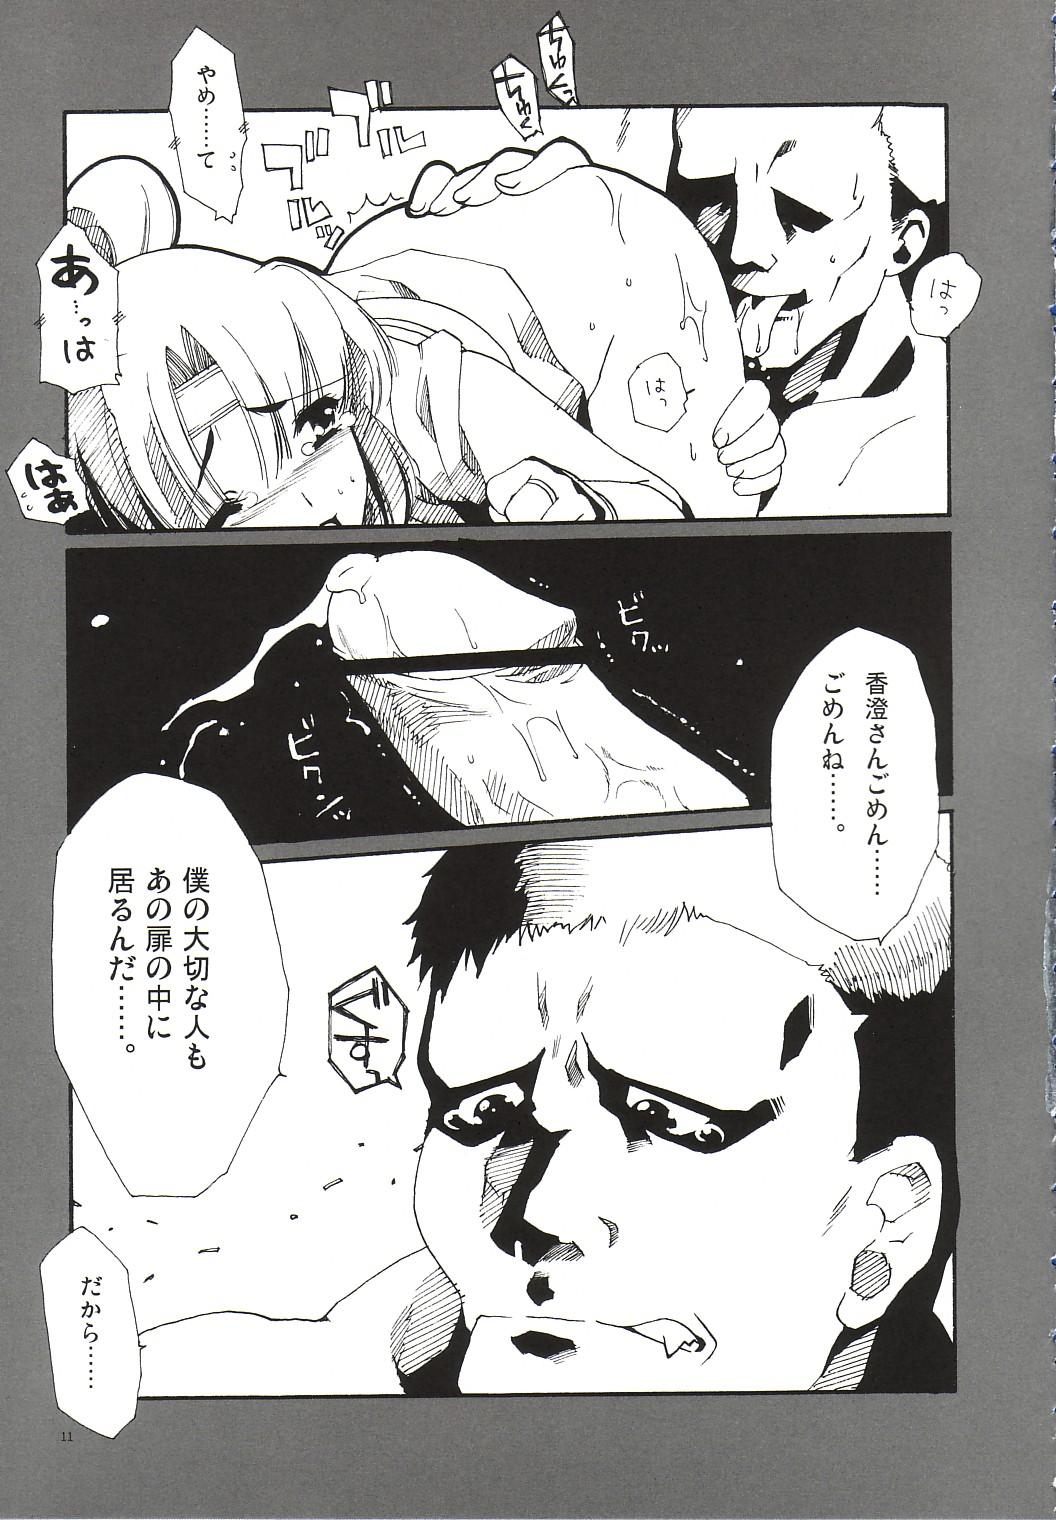 Suck Cock Homura - King of fighters Scene - Page 10